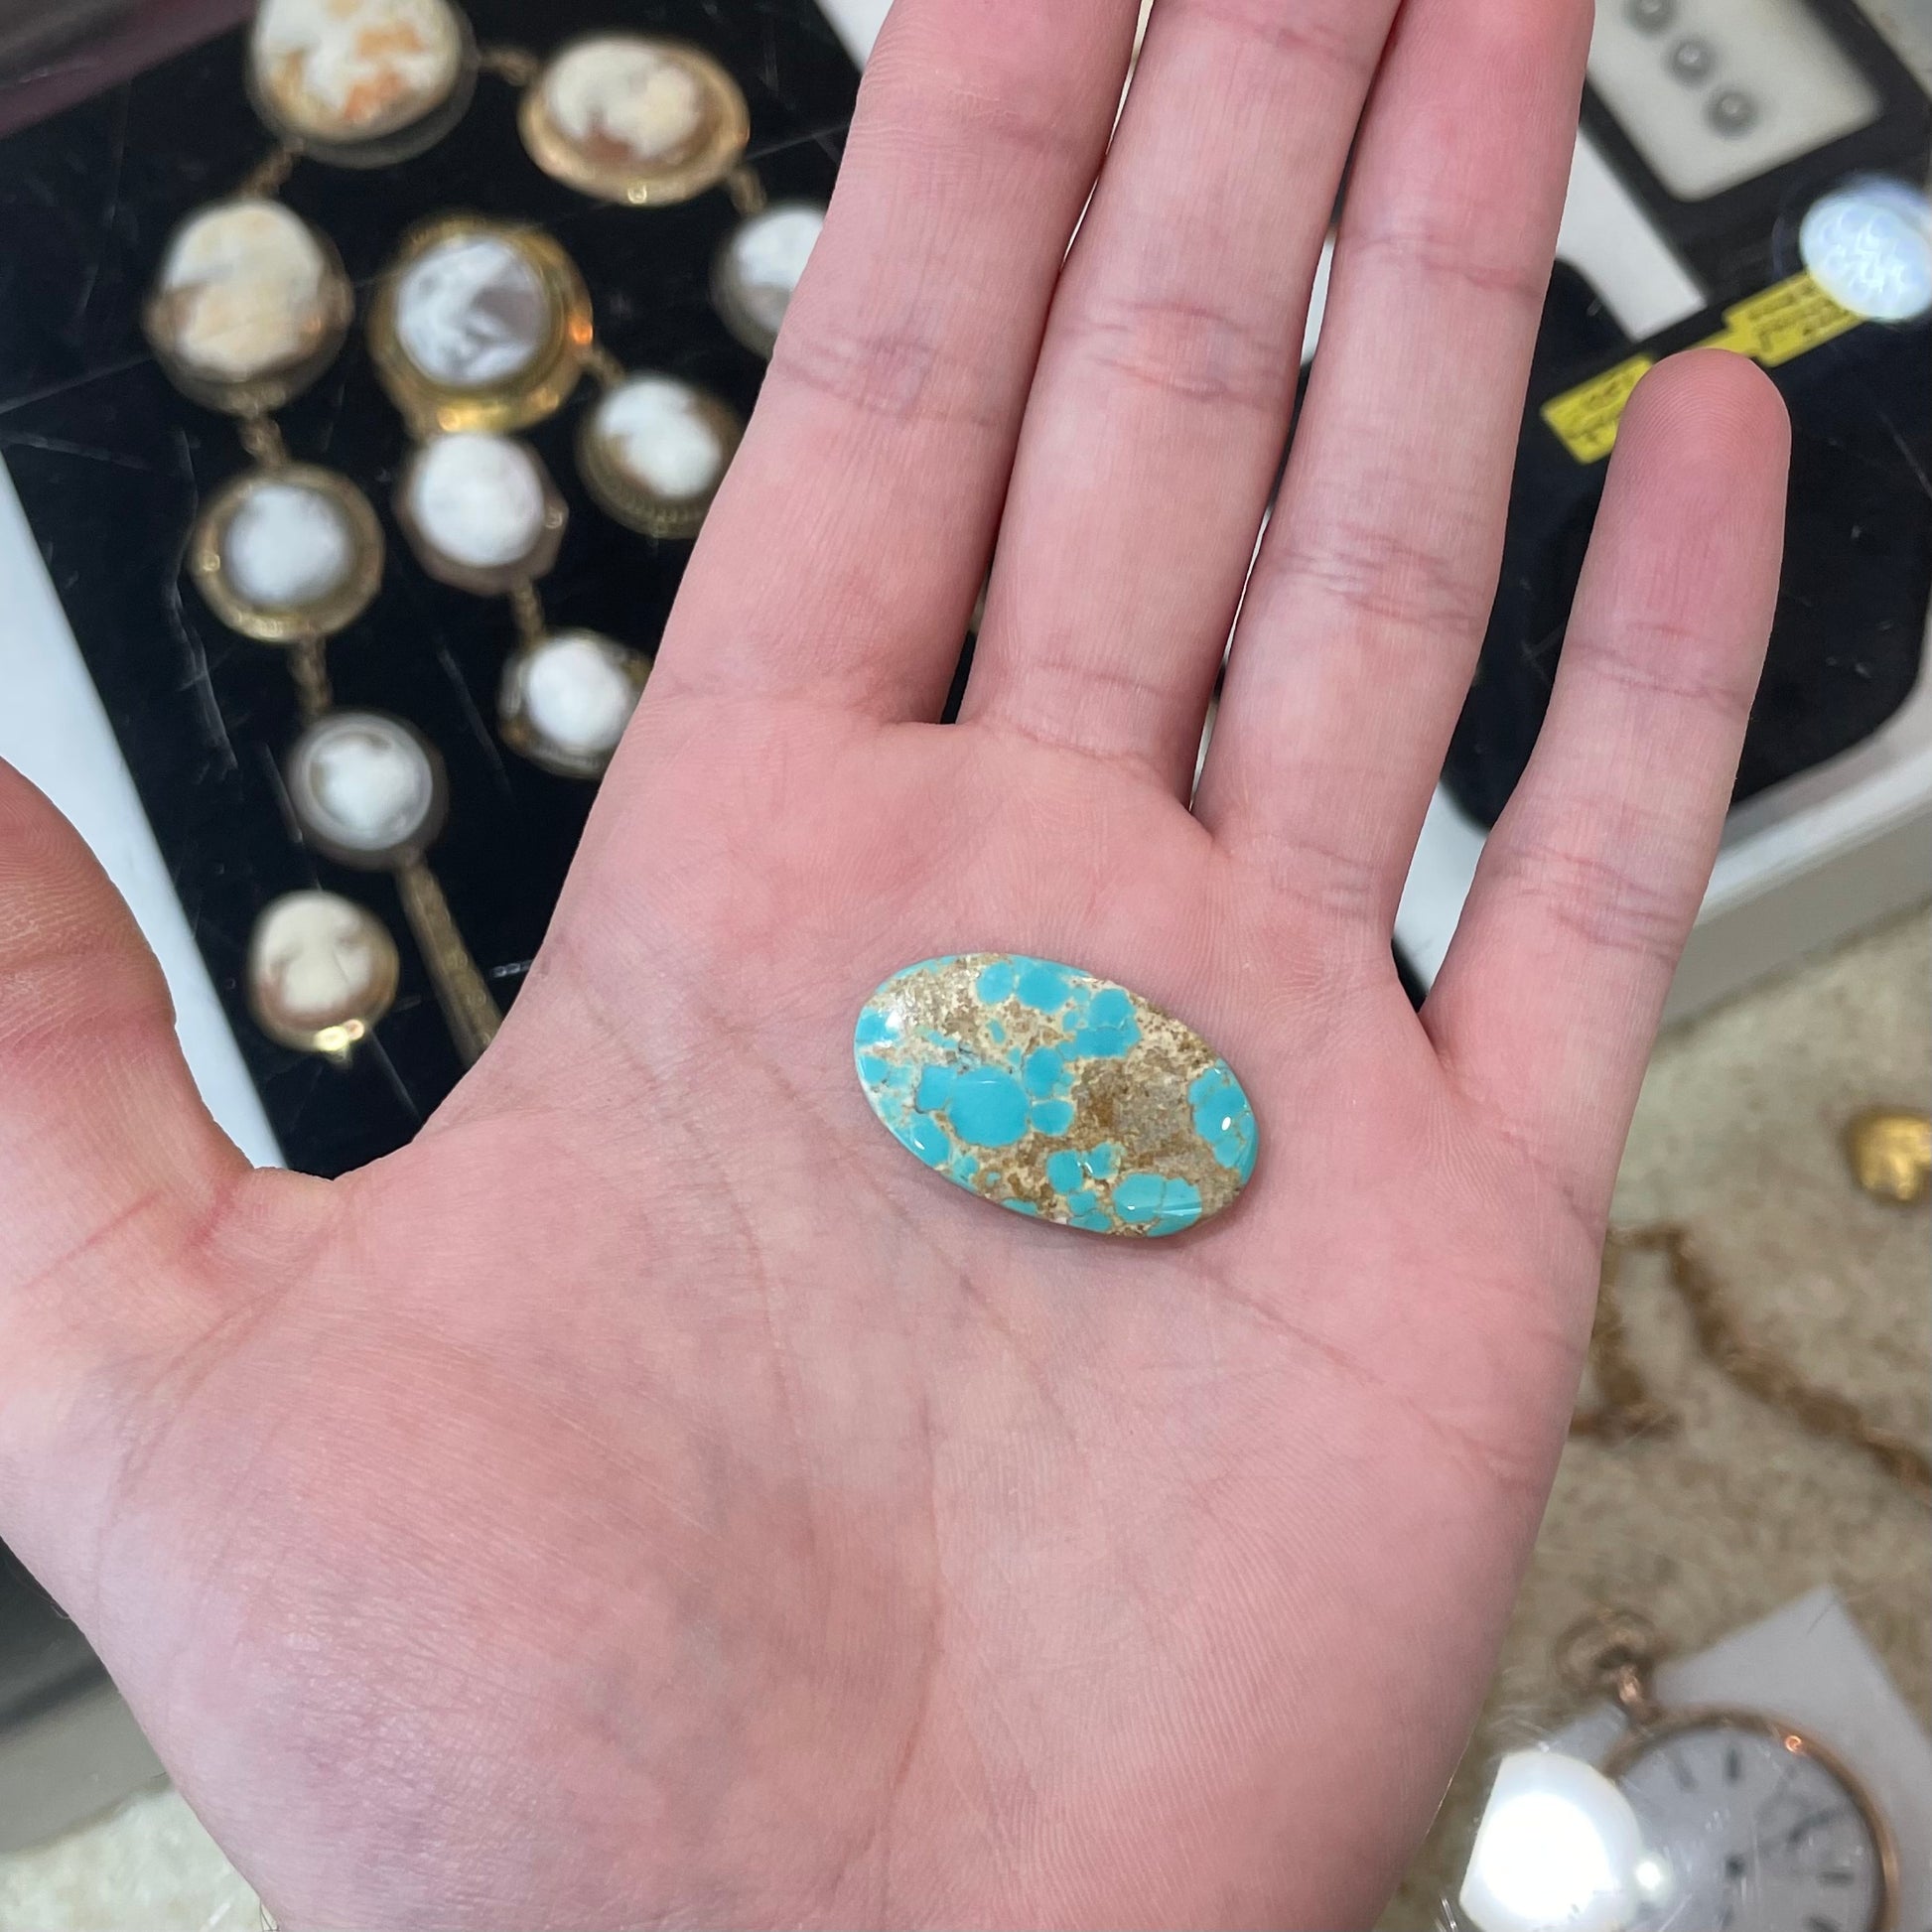 An oval cabochon cut loose Fox turquoise stone.